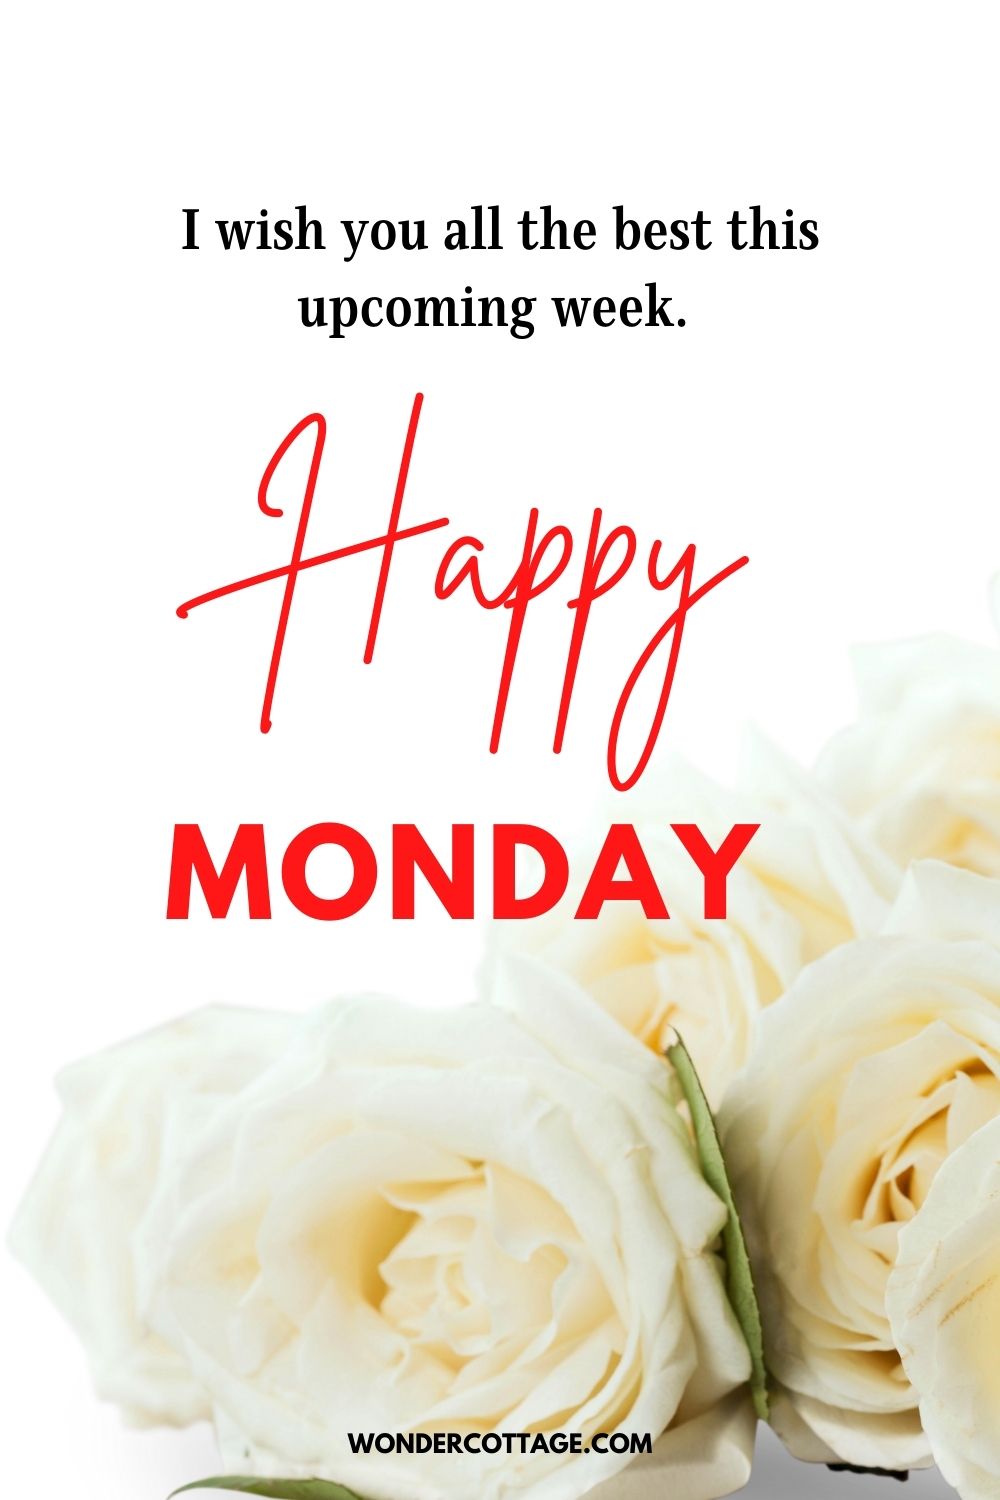 I wish you all the best this upcoming week. Happy Monday